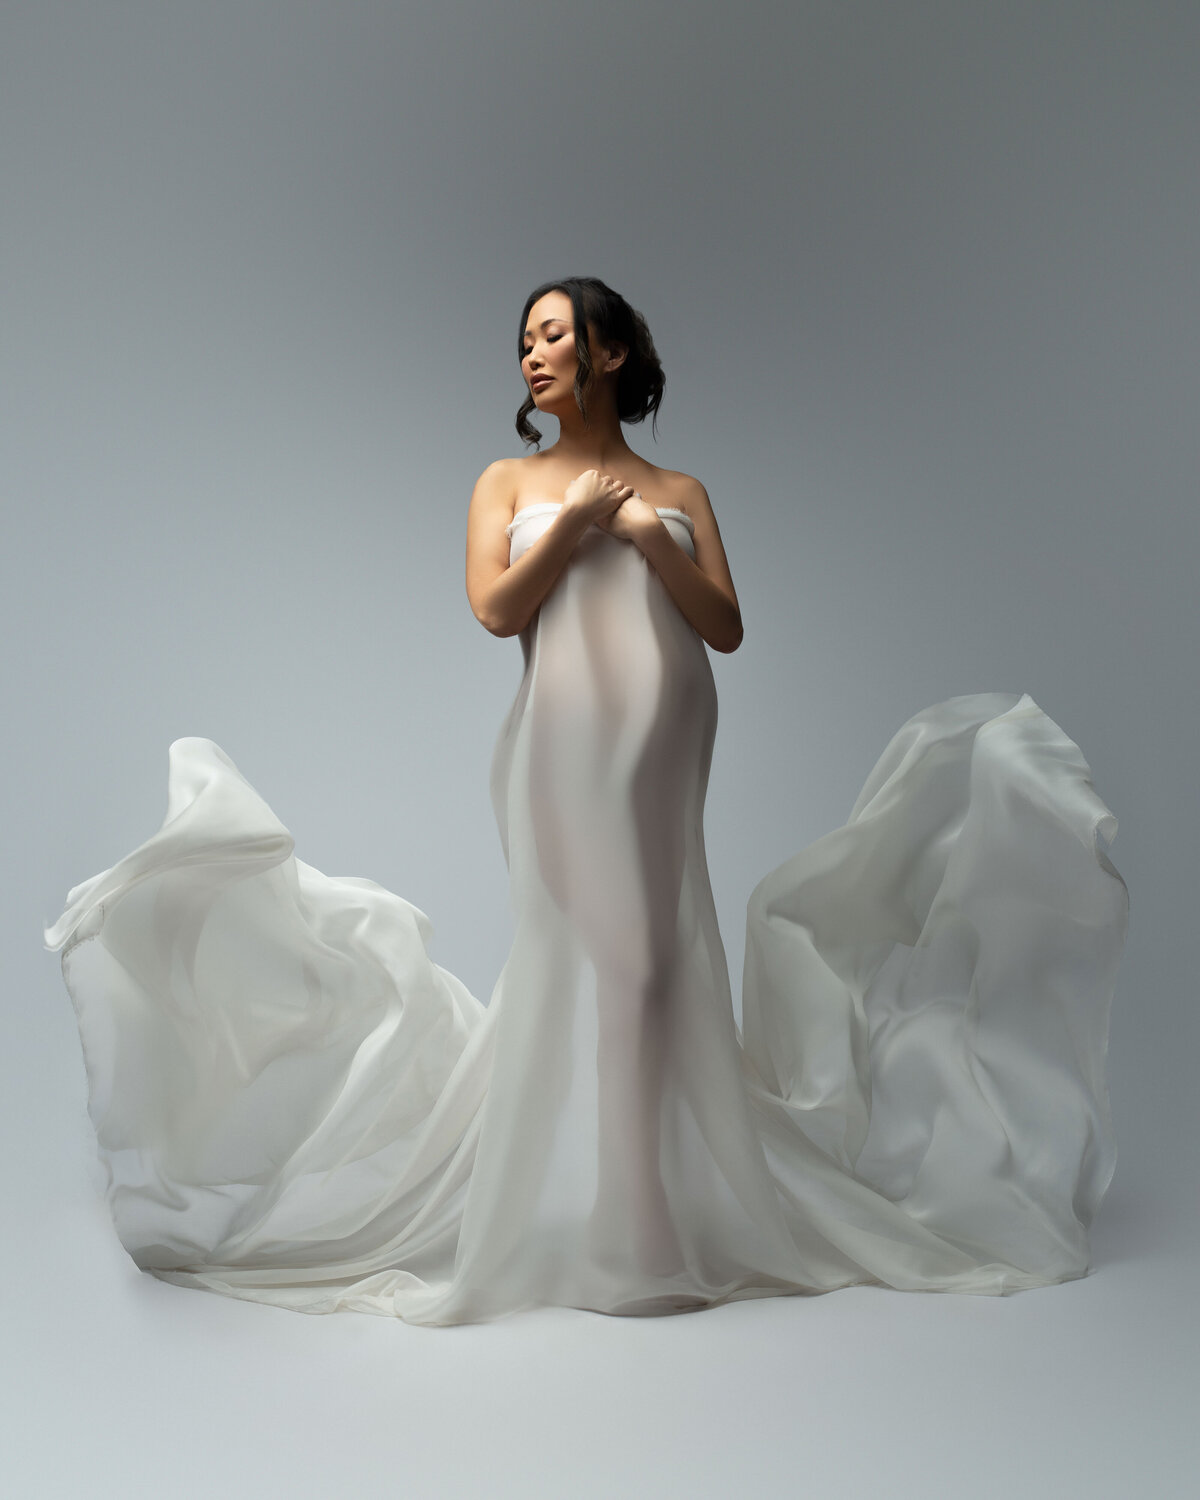 30 weeks pregnant stunning asian woman wrapped in flying white fabrics, closing her eyes with an all white backdrop in studio